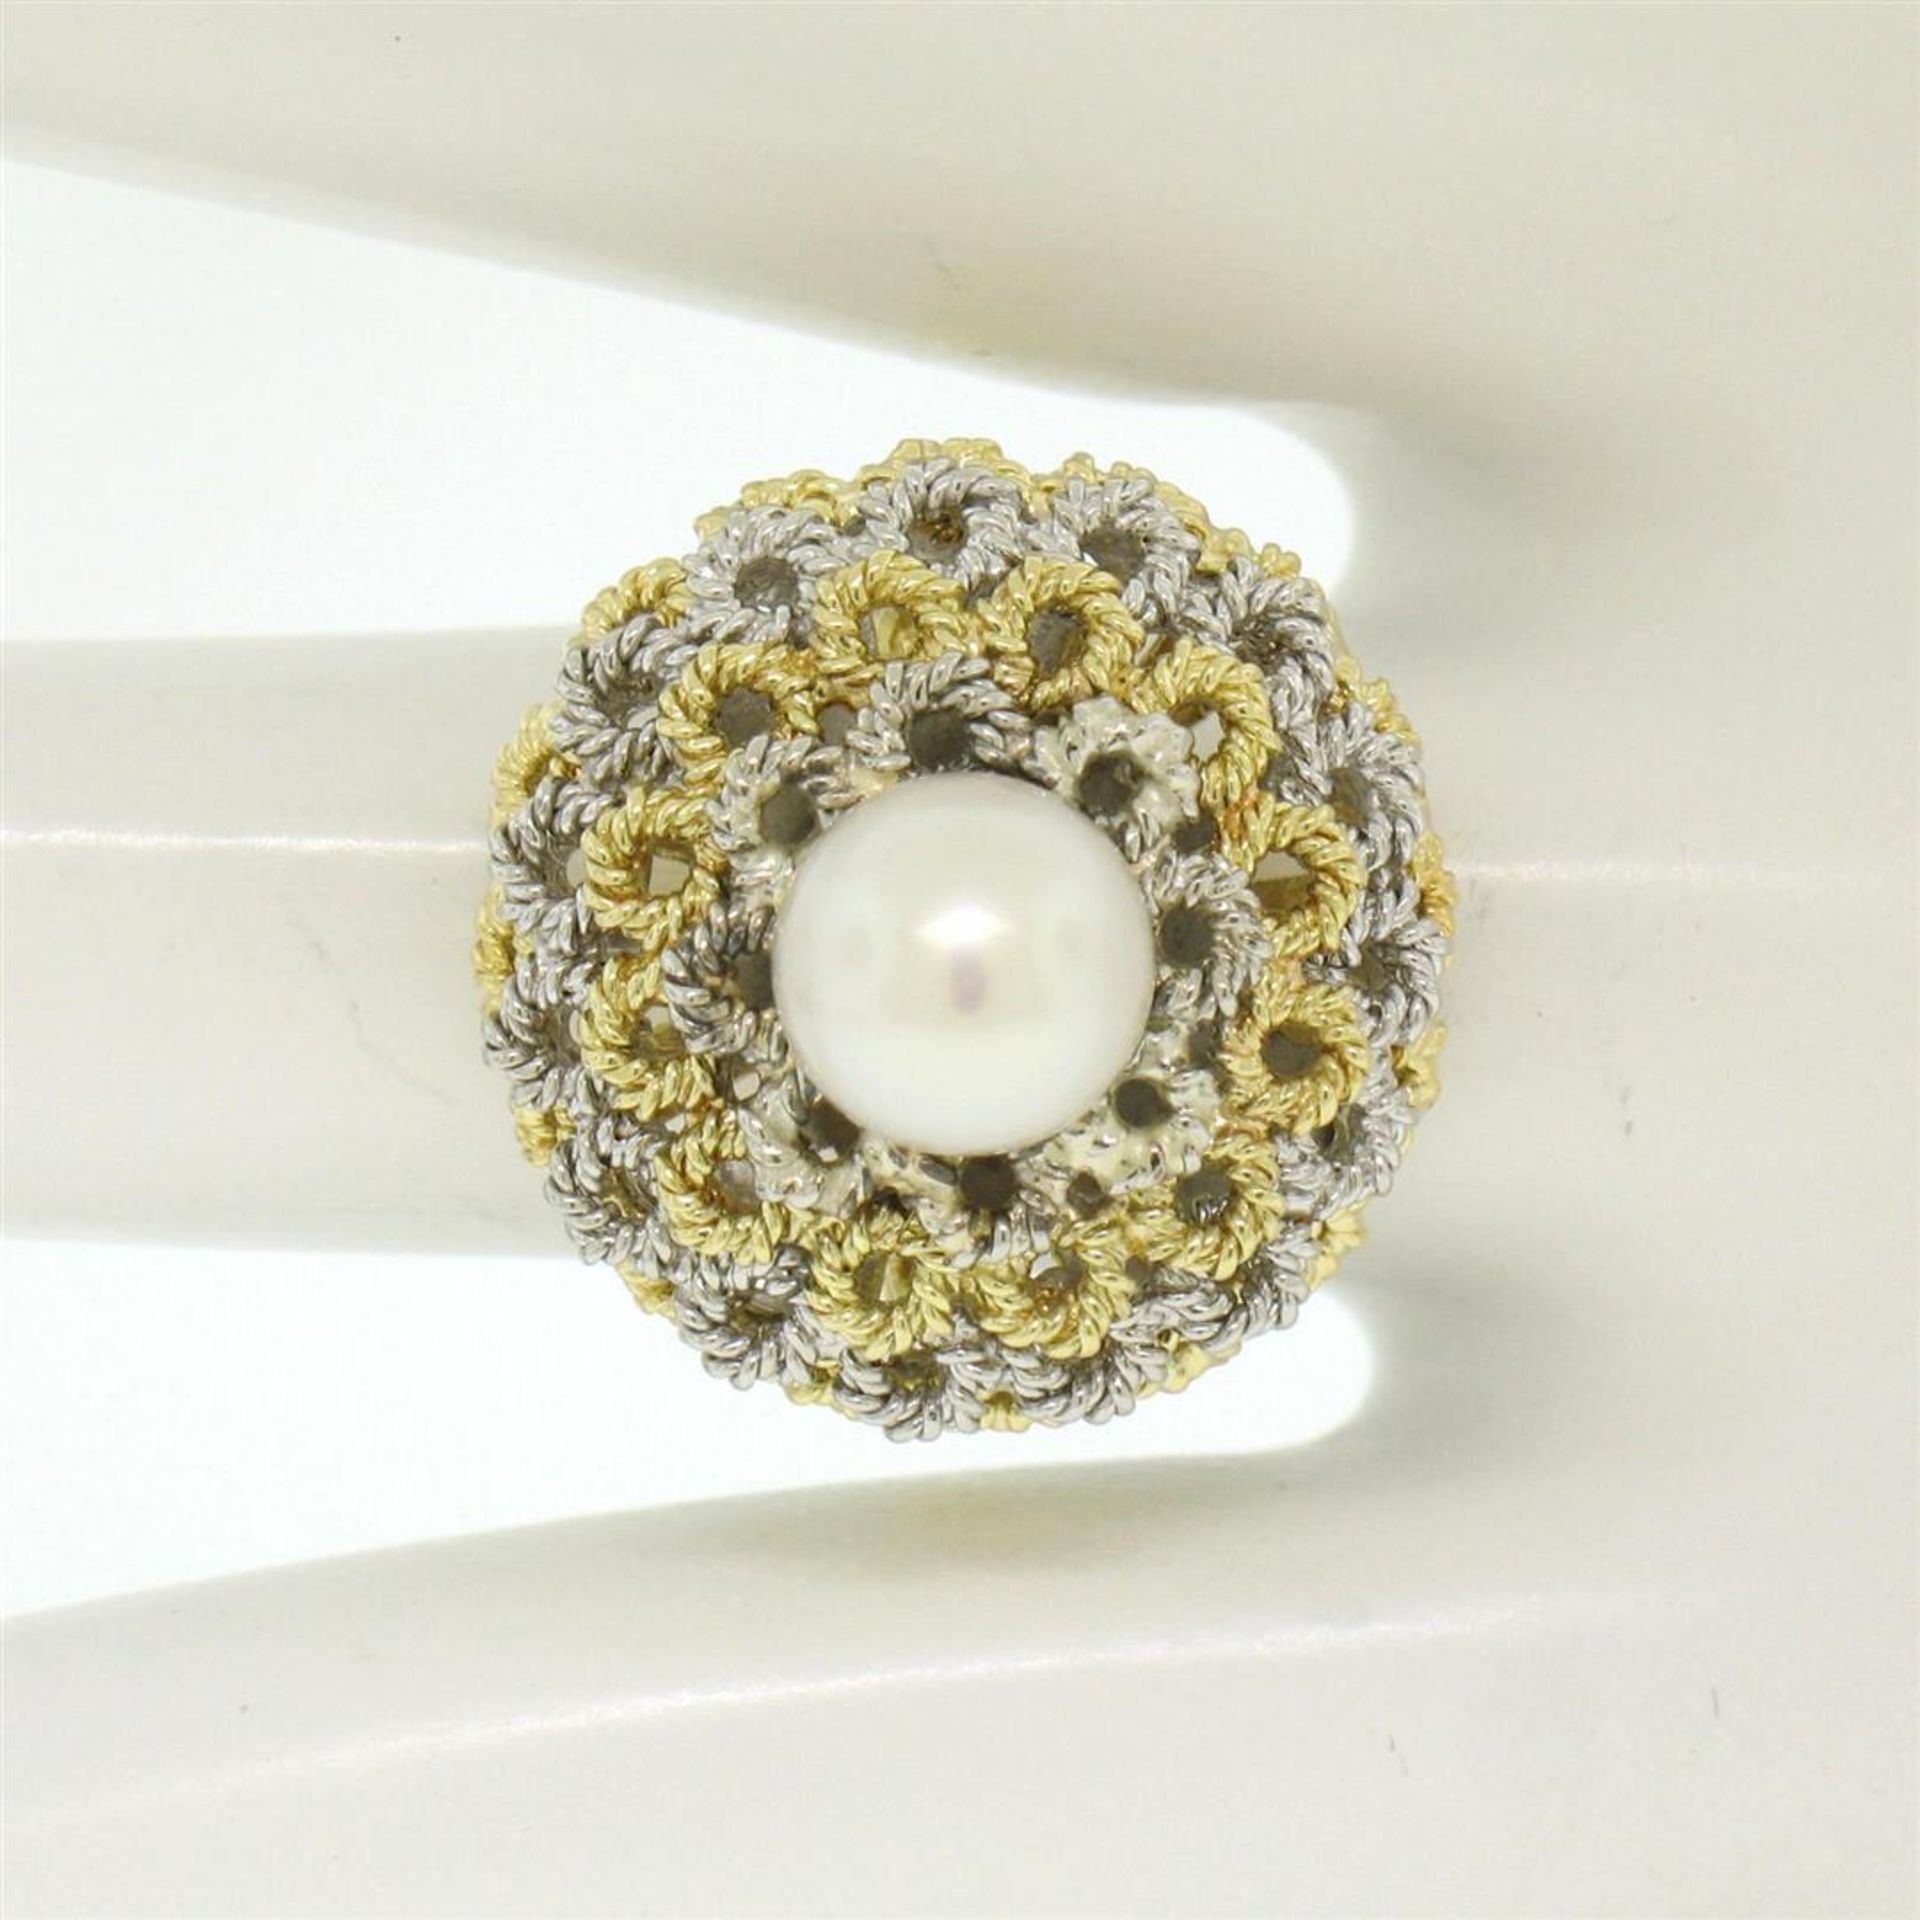 Handmade 18kt Yellow and White Gold Akoya Pearl Cocktail Ring - Image 7 of 7